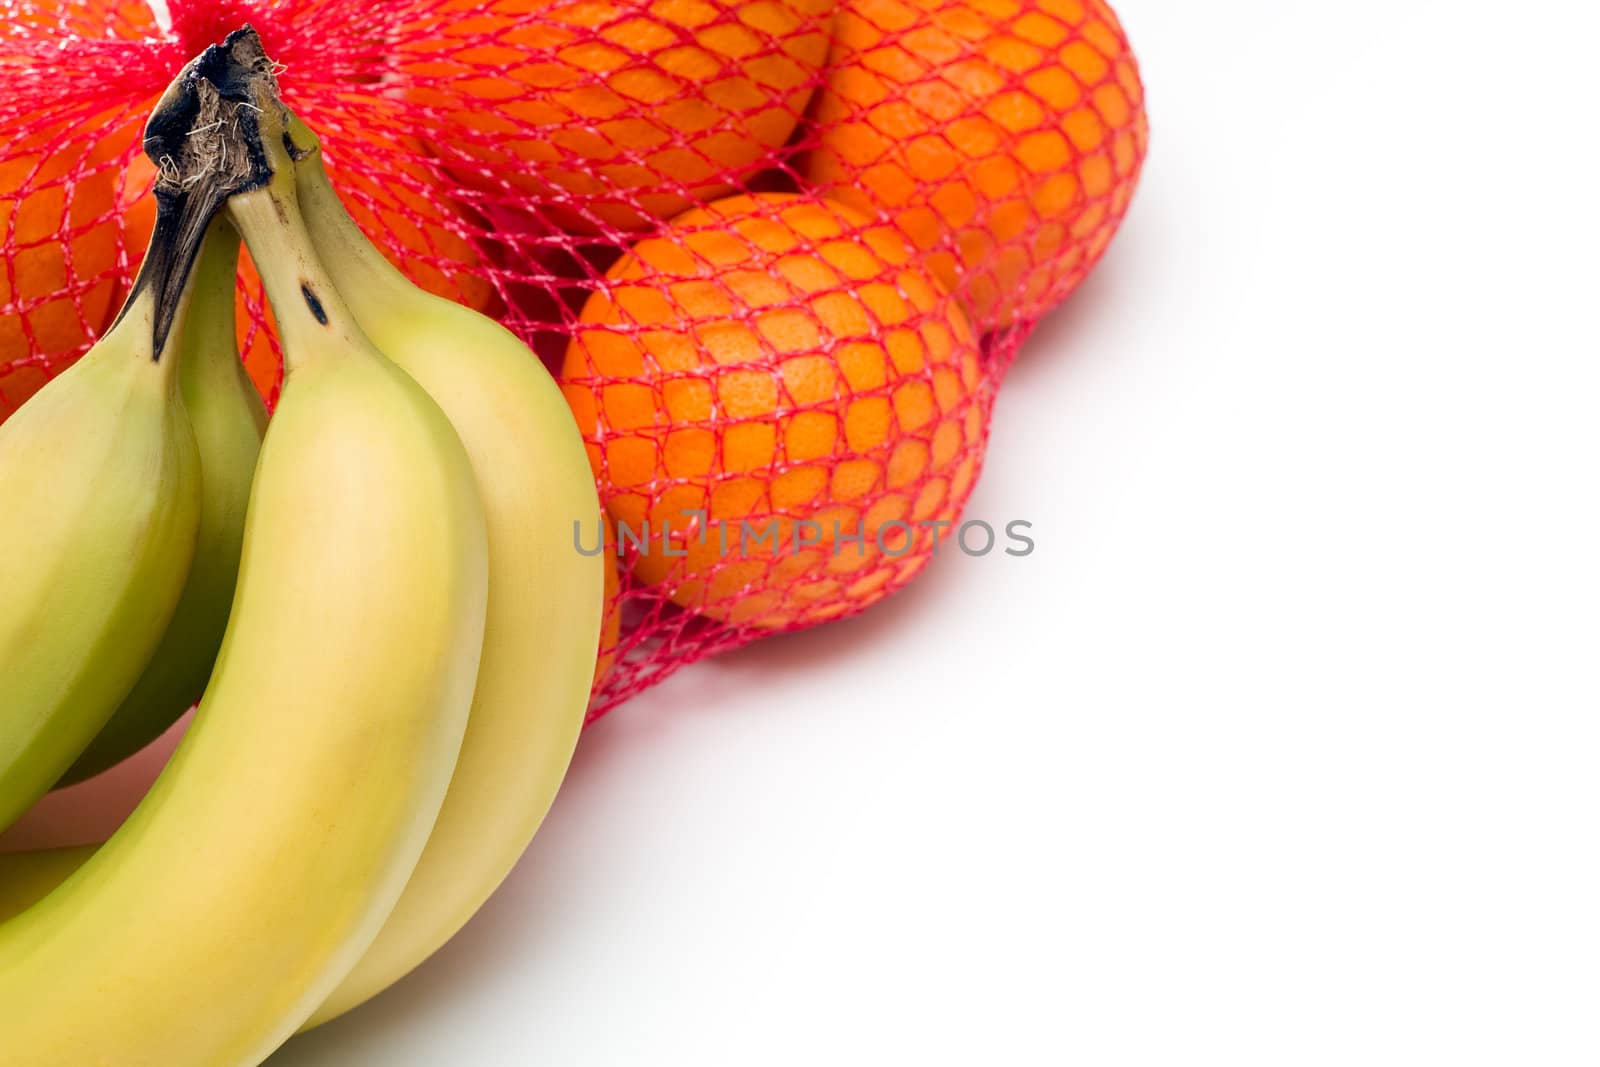 Bunches of Oranges in netting, and Bananas, isolated on white.